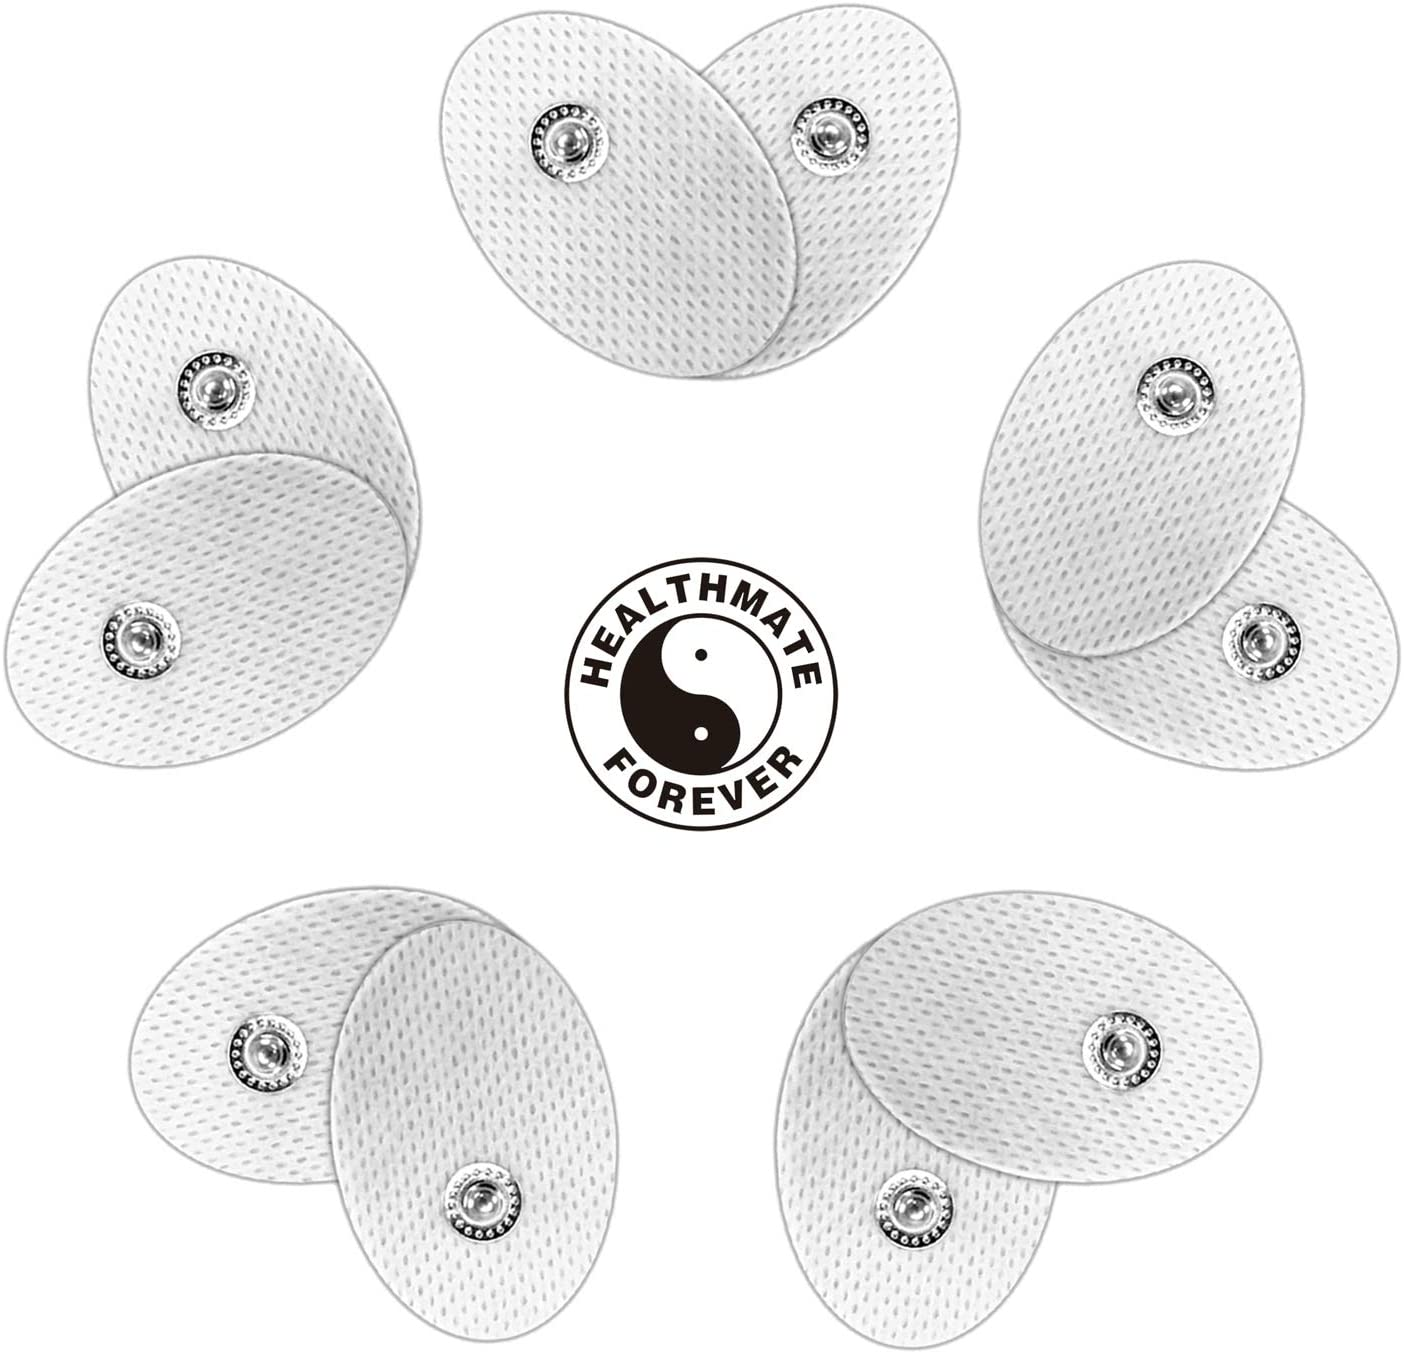 5 Pairs (10 Pcs) Snap-On Small Oval-Shaped Non-woven Electrode Patches Pads - HealthmateForever.com